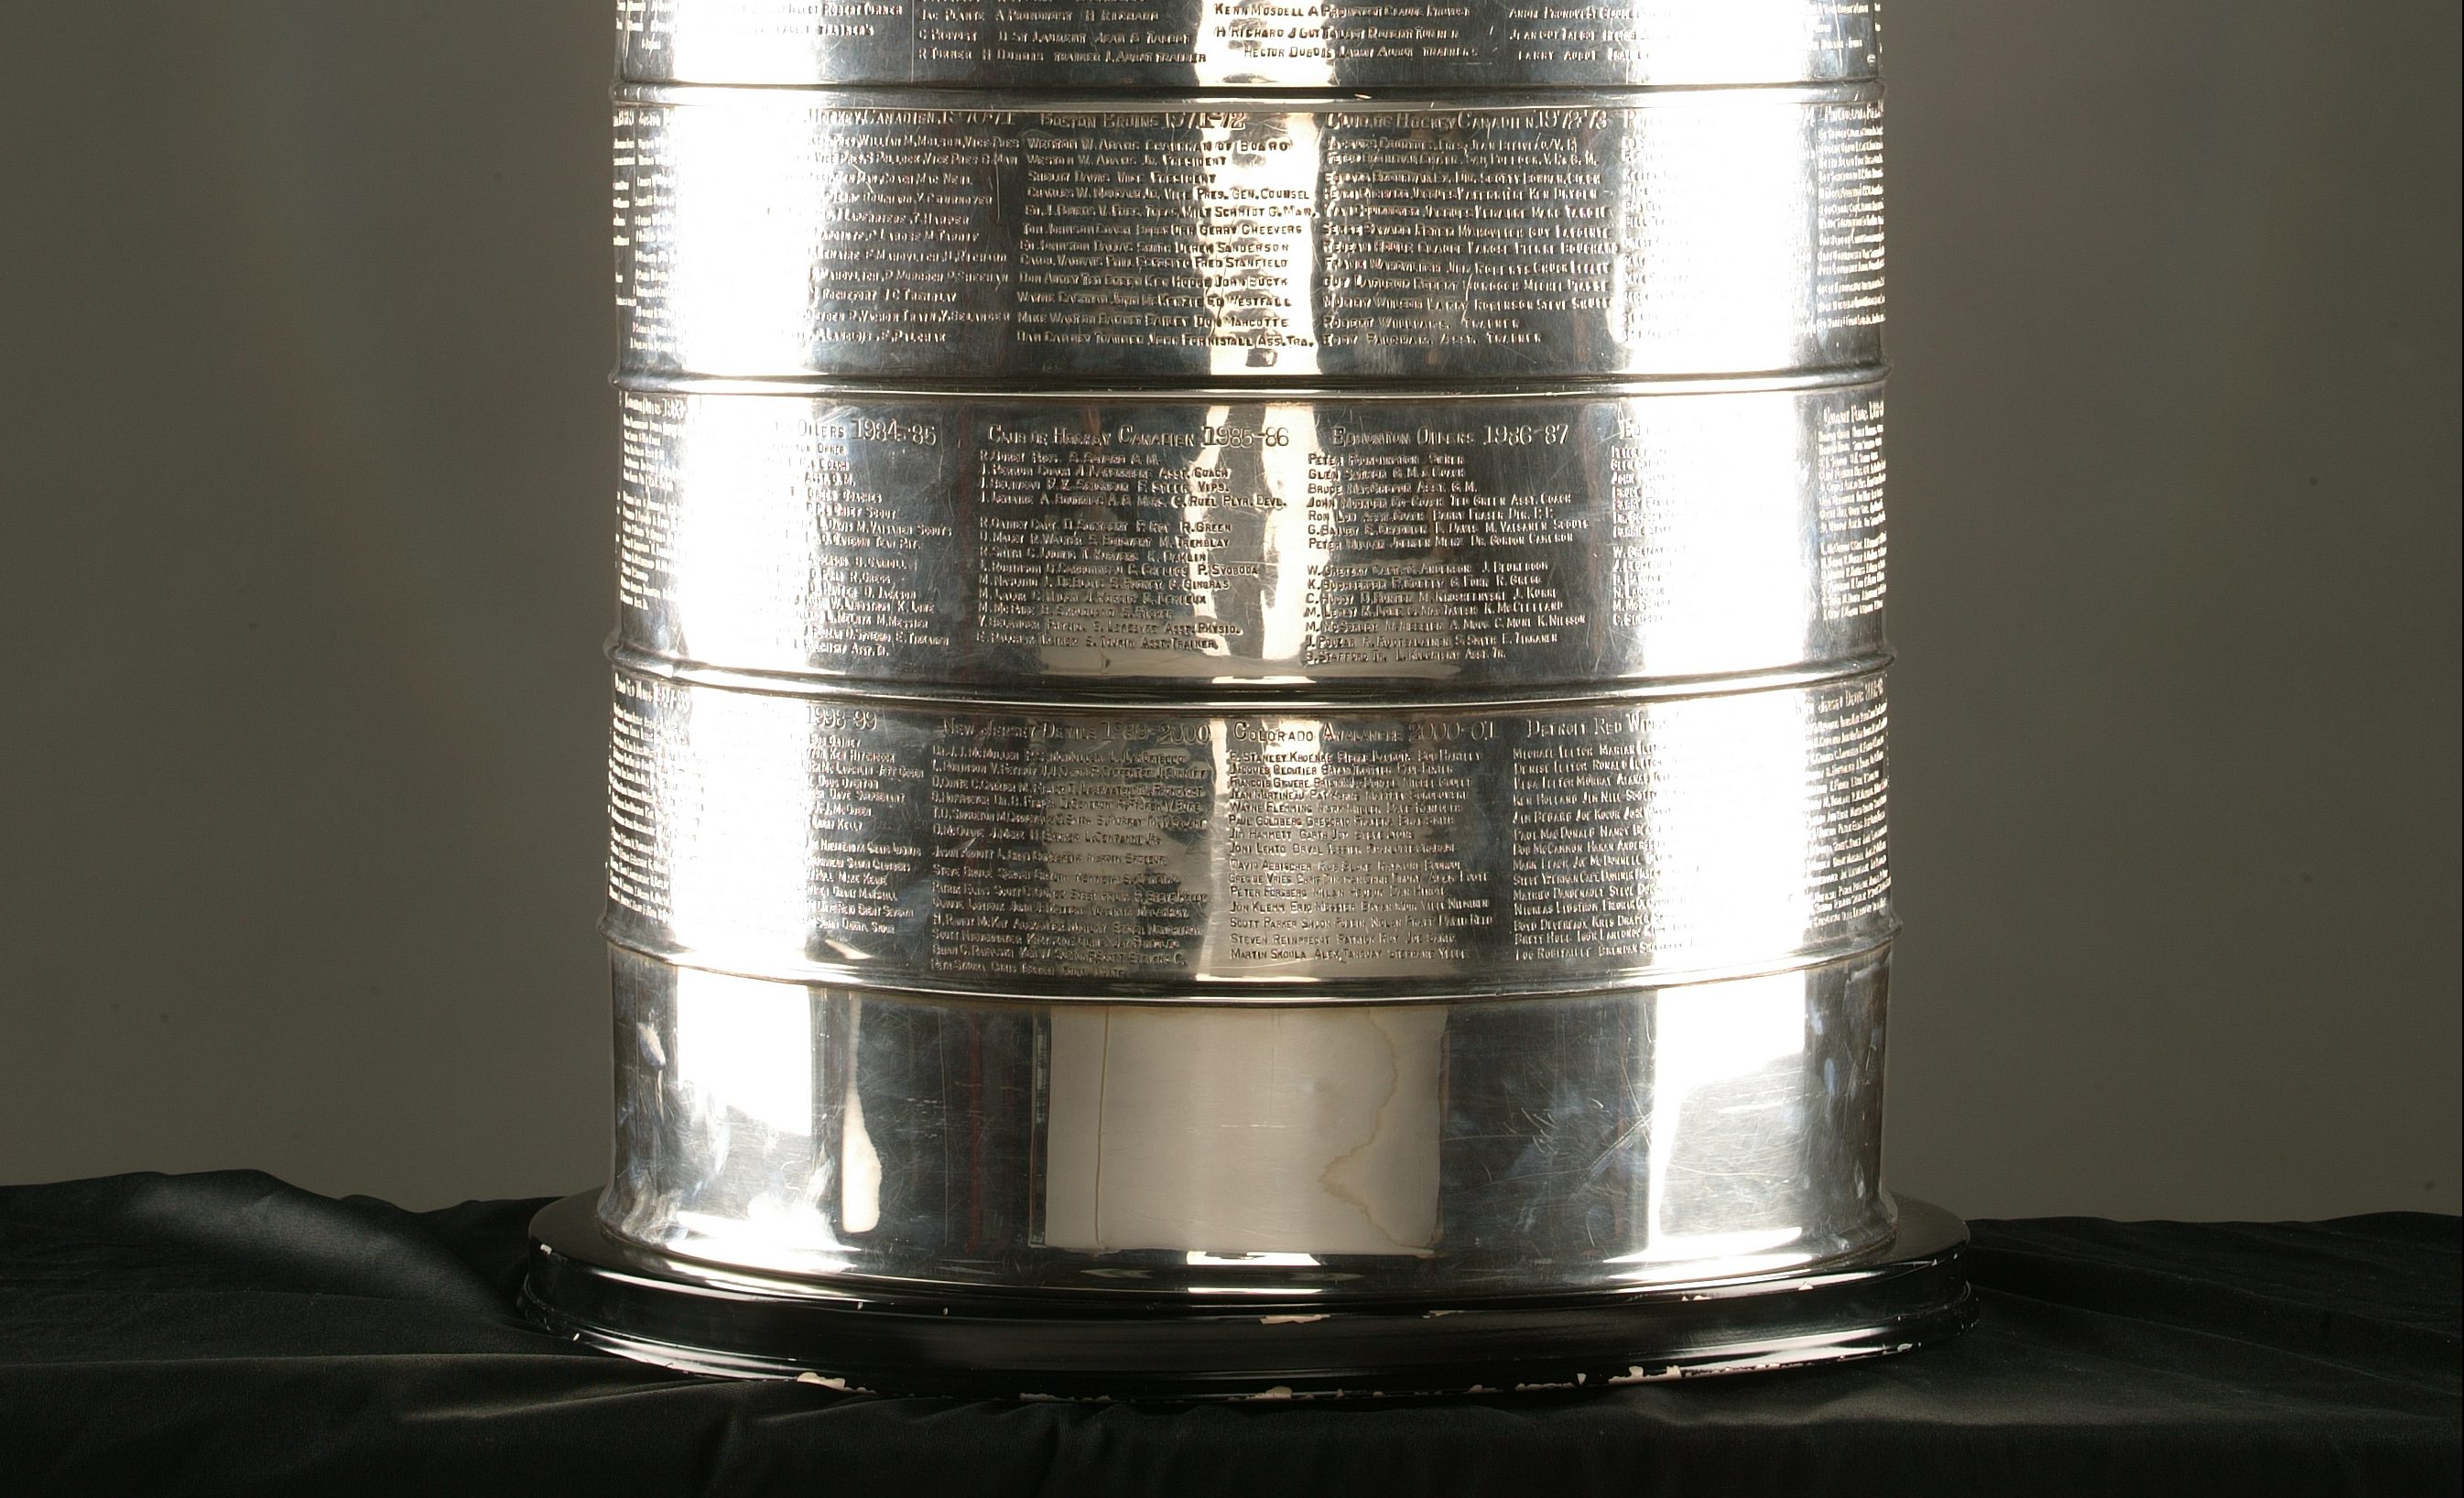 Authentic NHL Stanley Cup Replica 8 tall